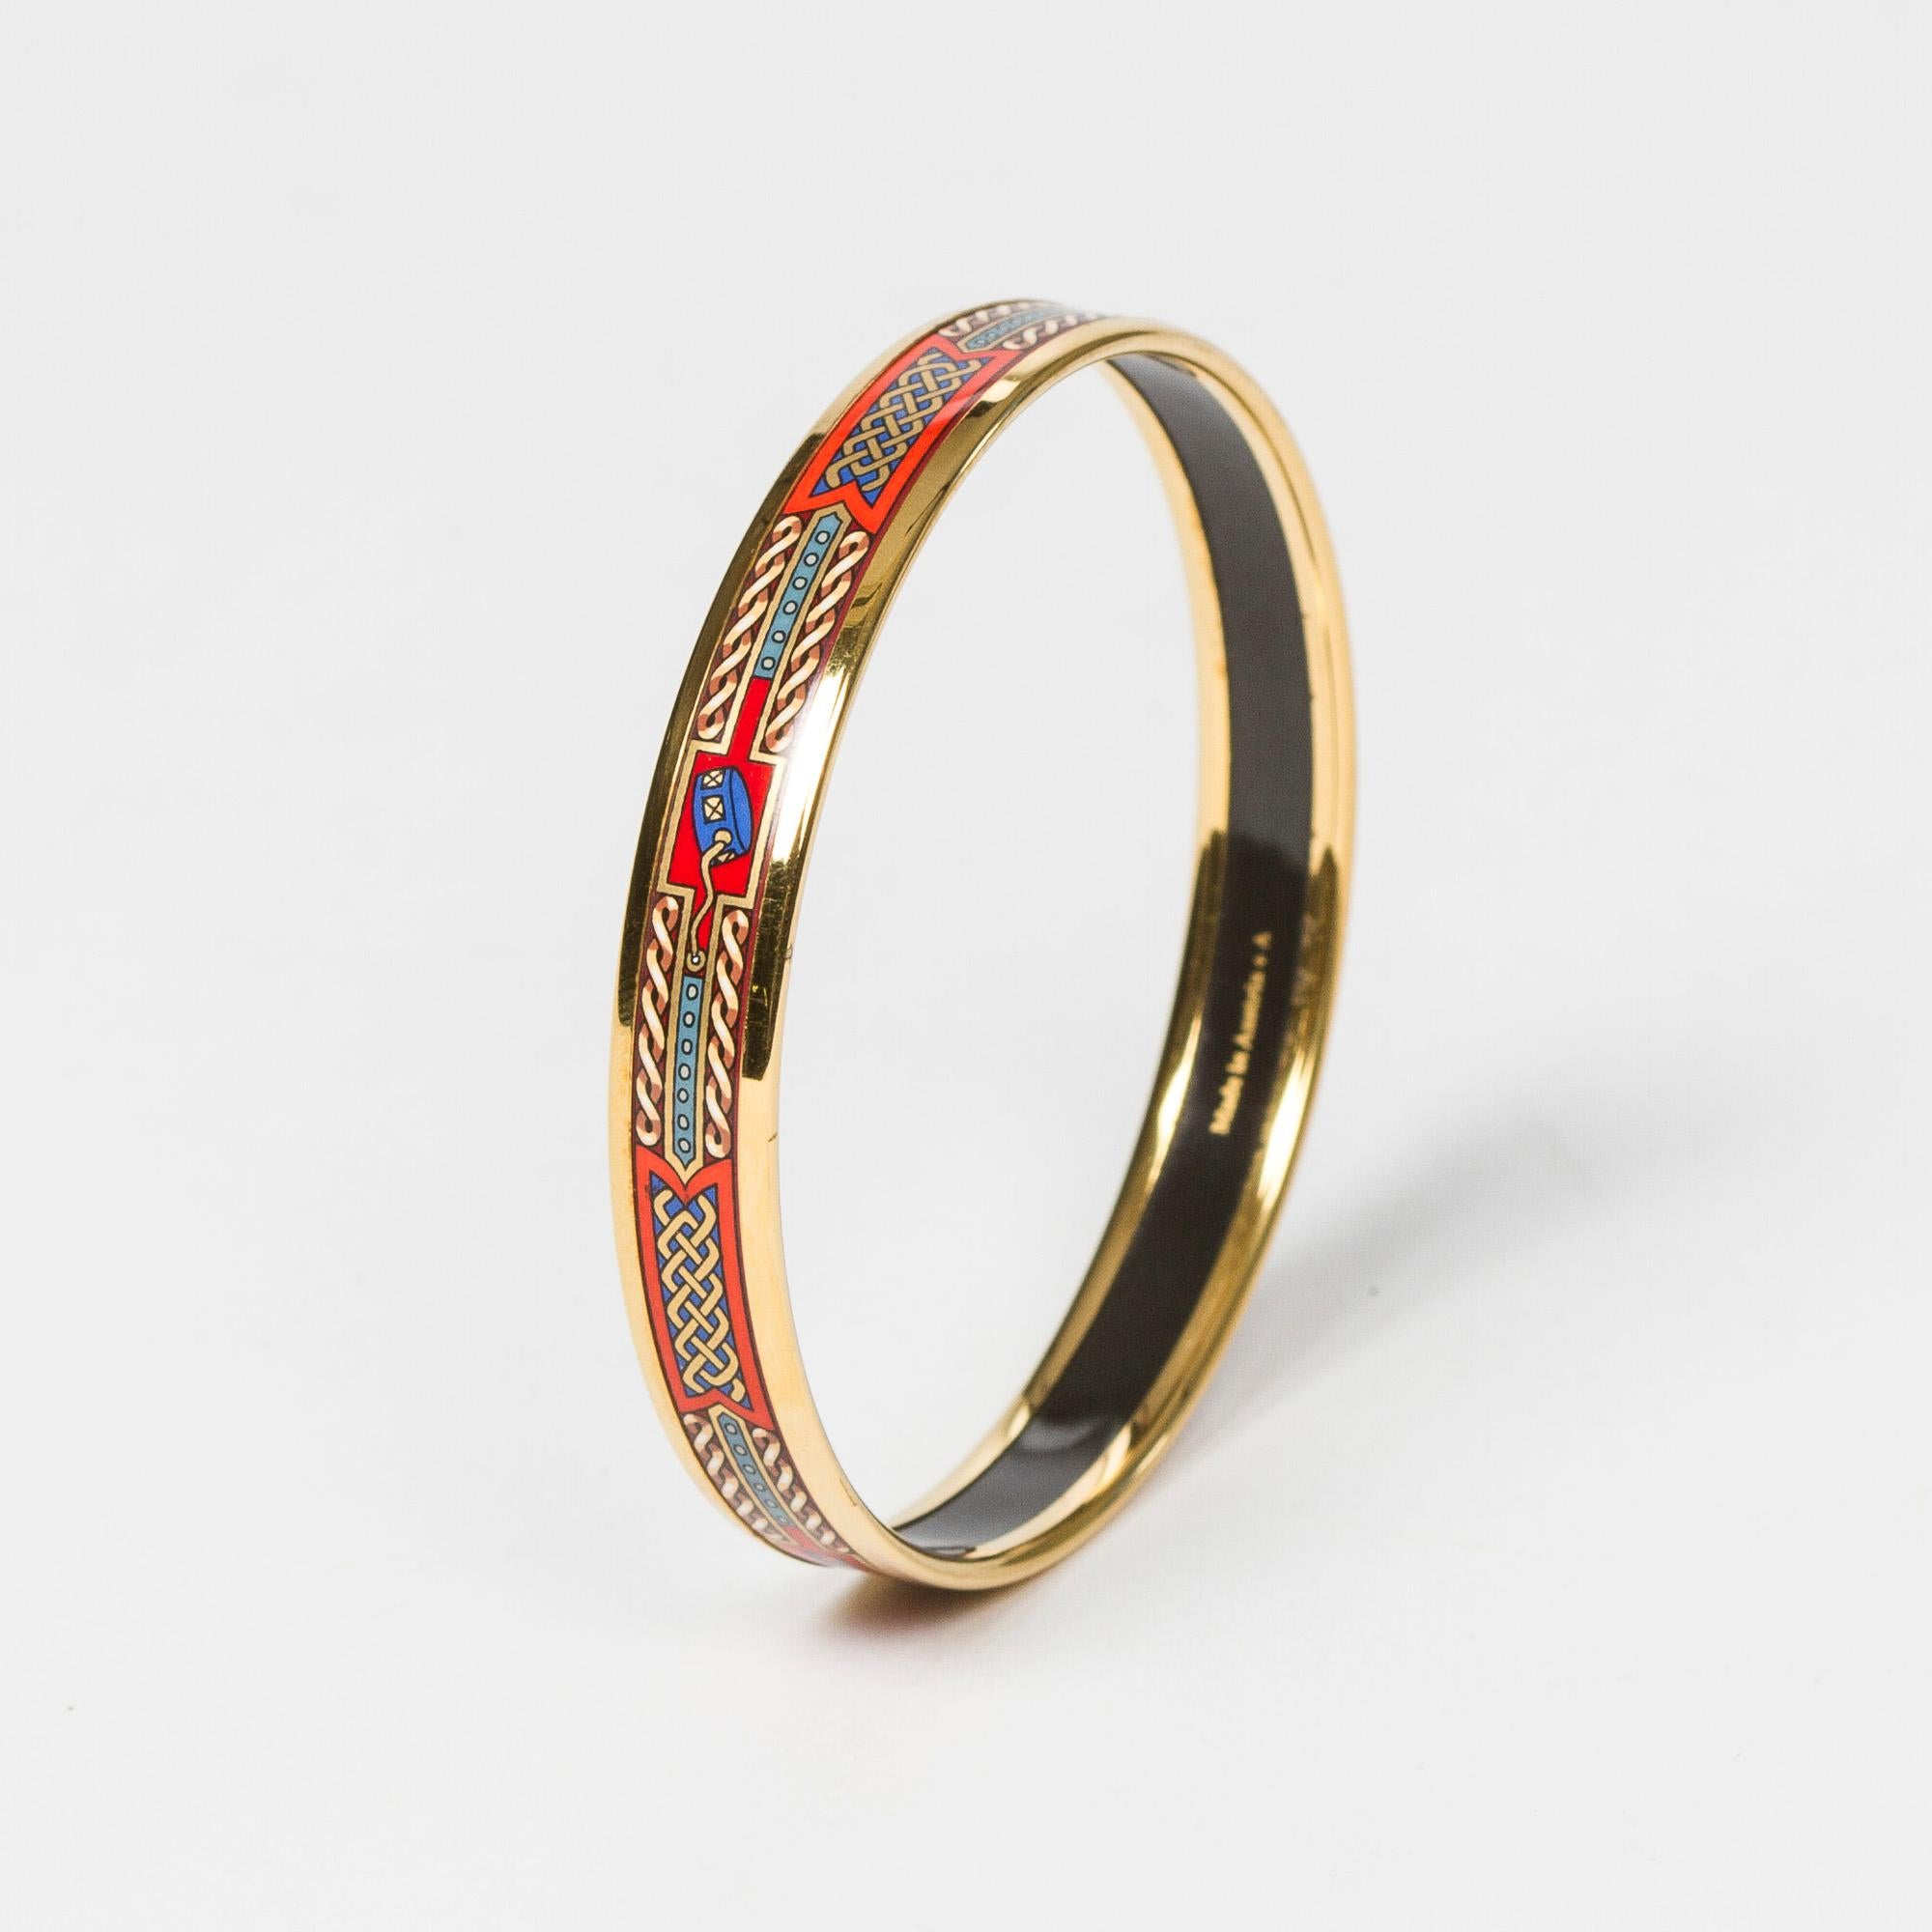 Hermes Enamel Bangle In Good Condition For Sale In Dublin, IE